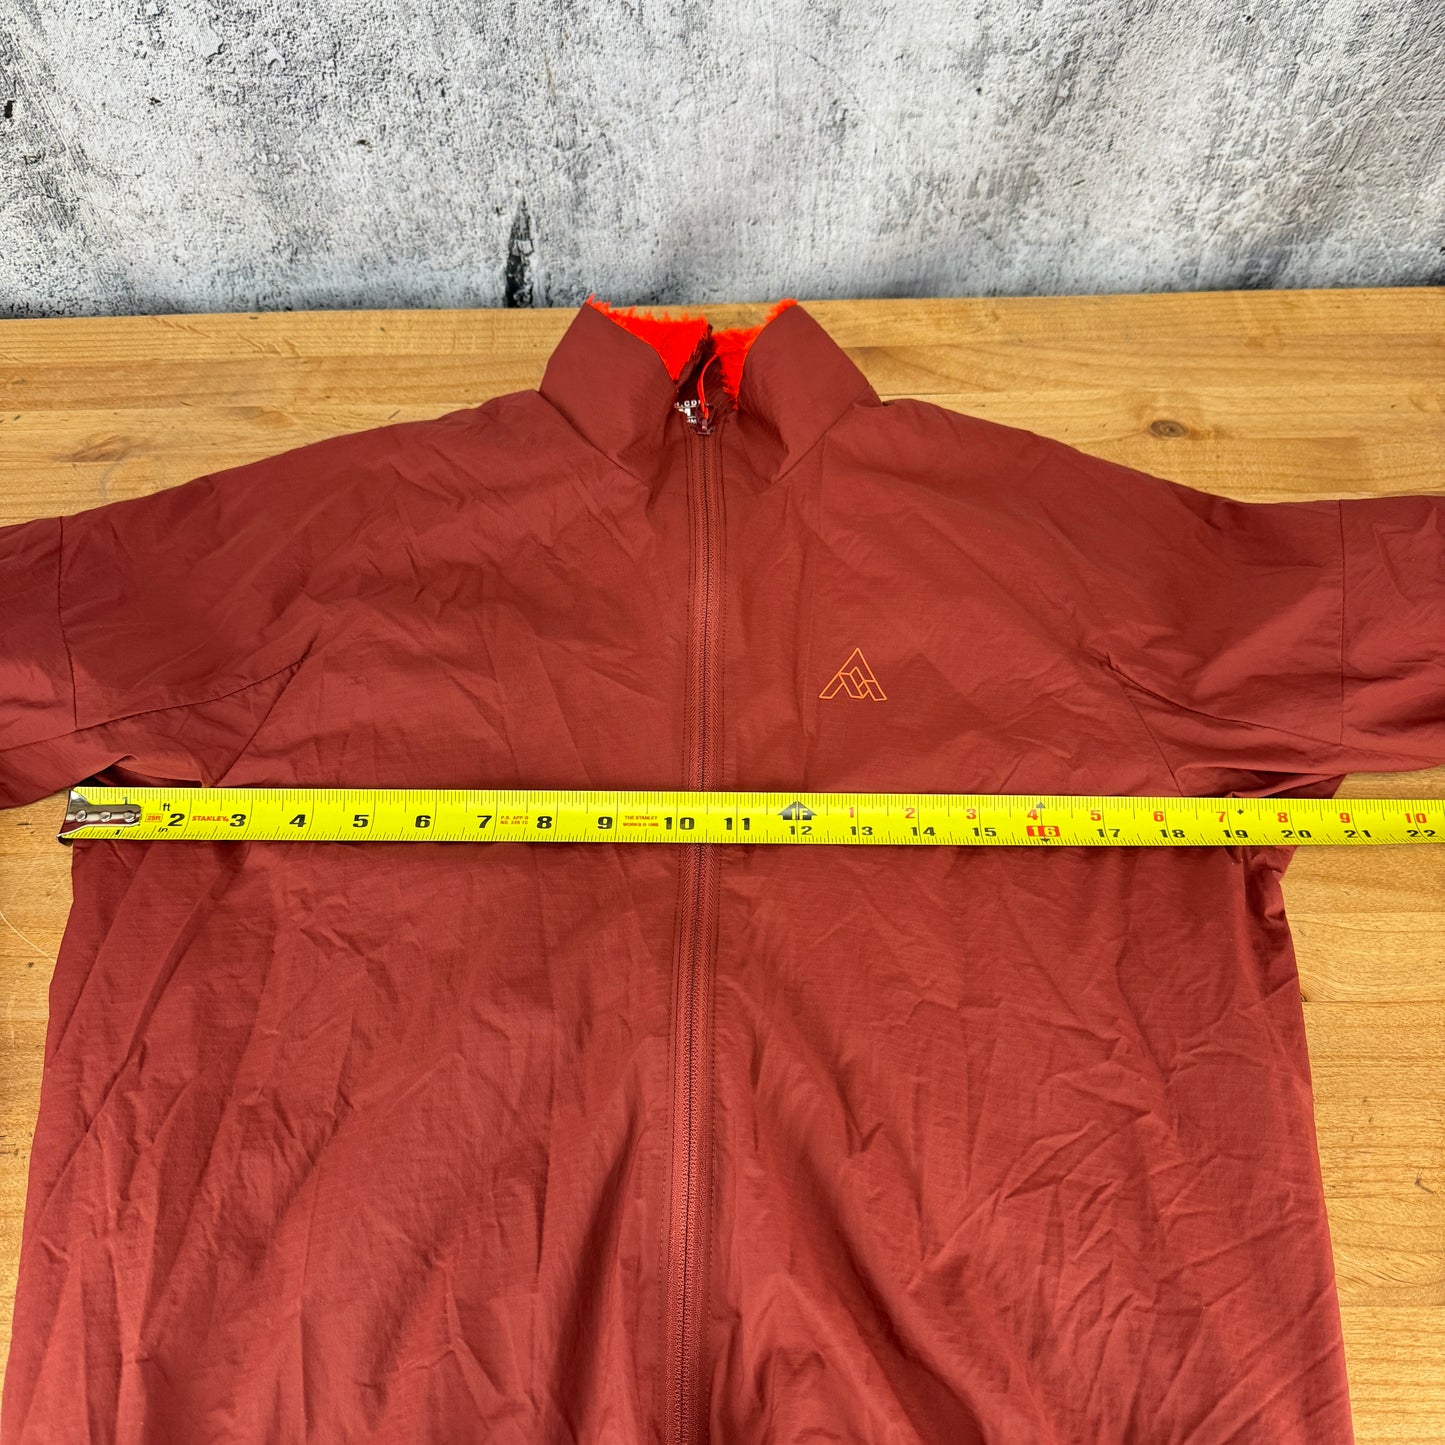 New w/o Tags! 7Mesh Men's Freeflow Red Medium Cycling Jacket $220 MSRP